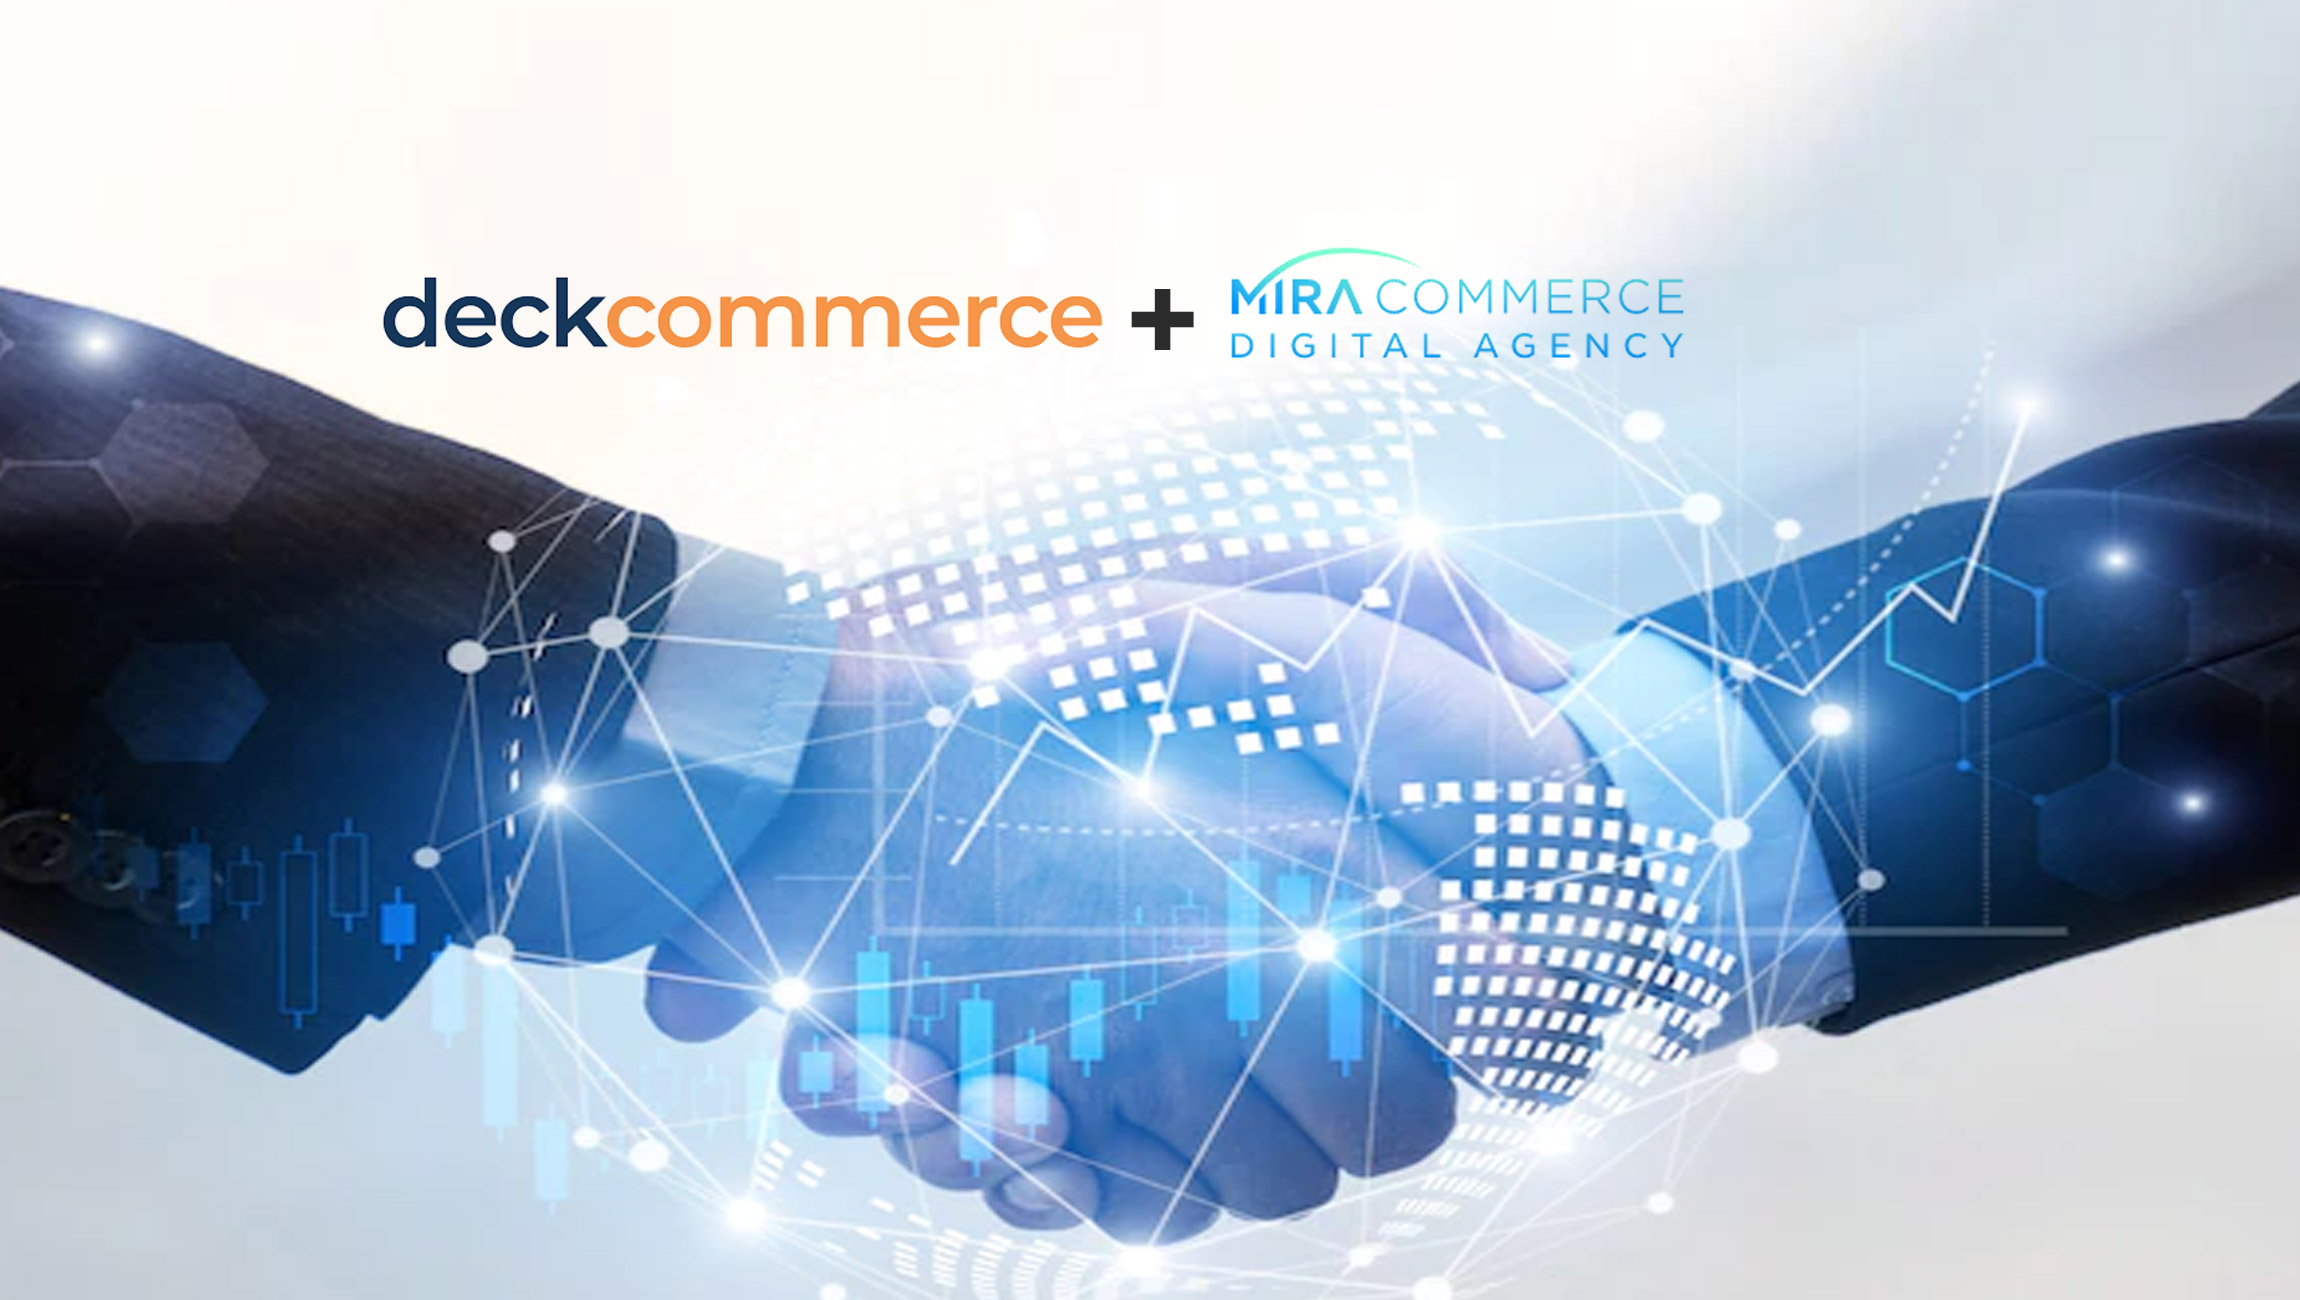 Deck Commerce and Mira Commerce Announce Premier Partnership To Help Brands and Retailers Manage Orders More Efficiently